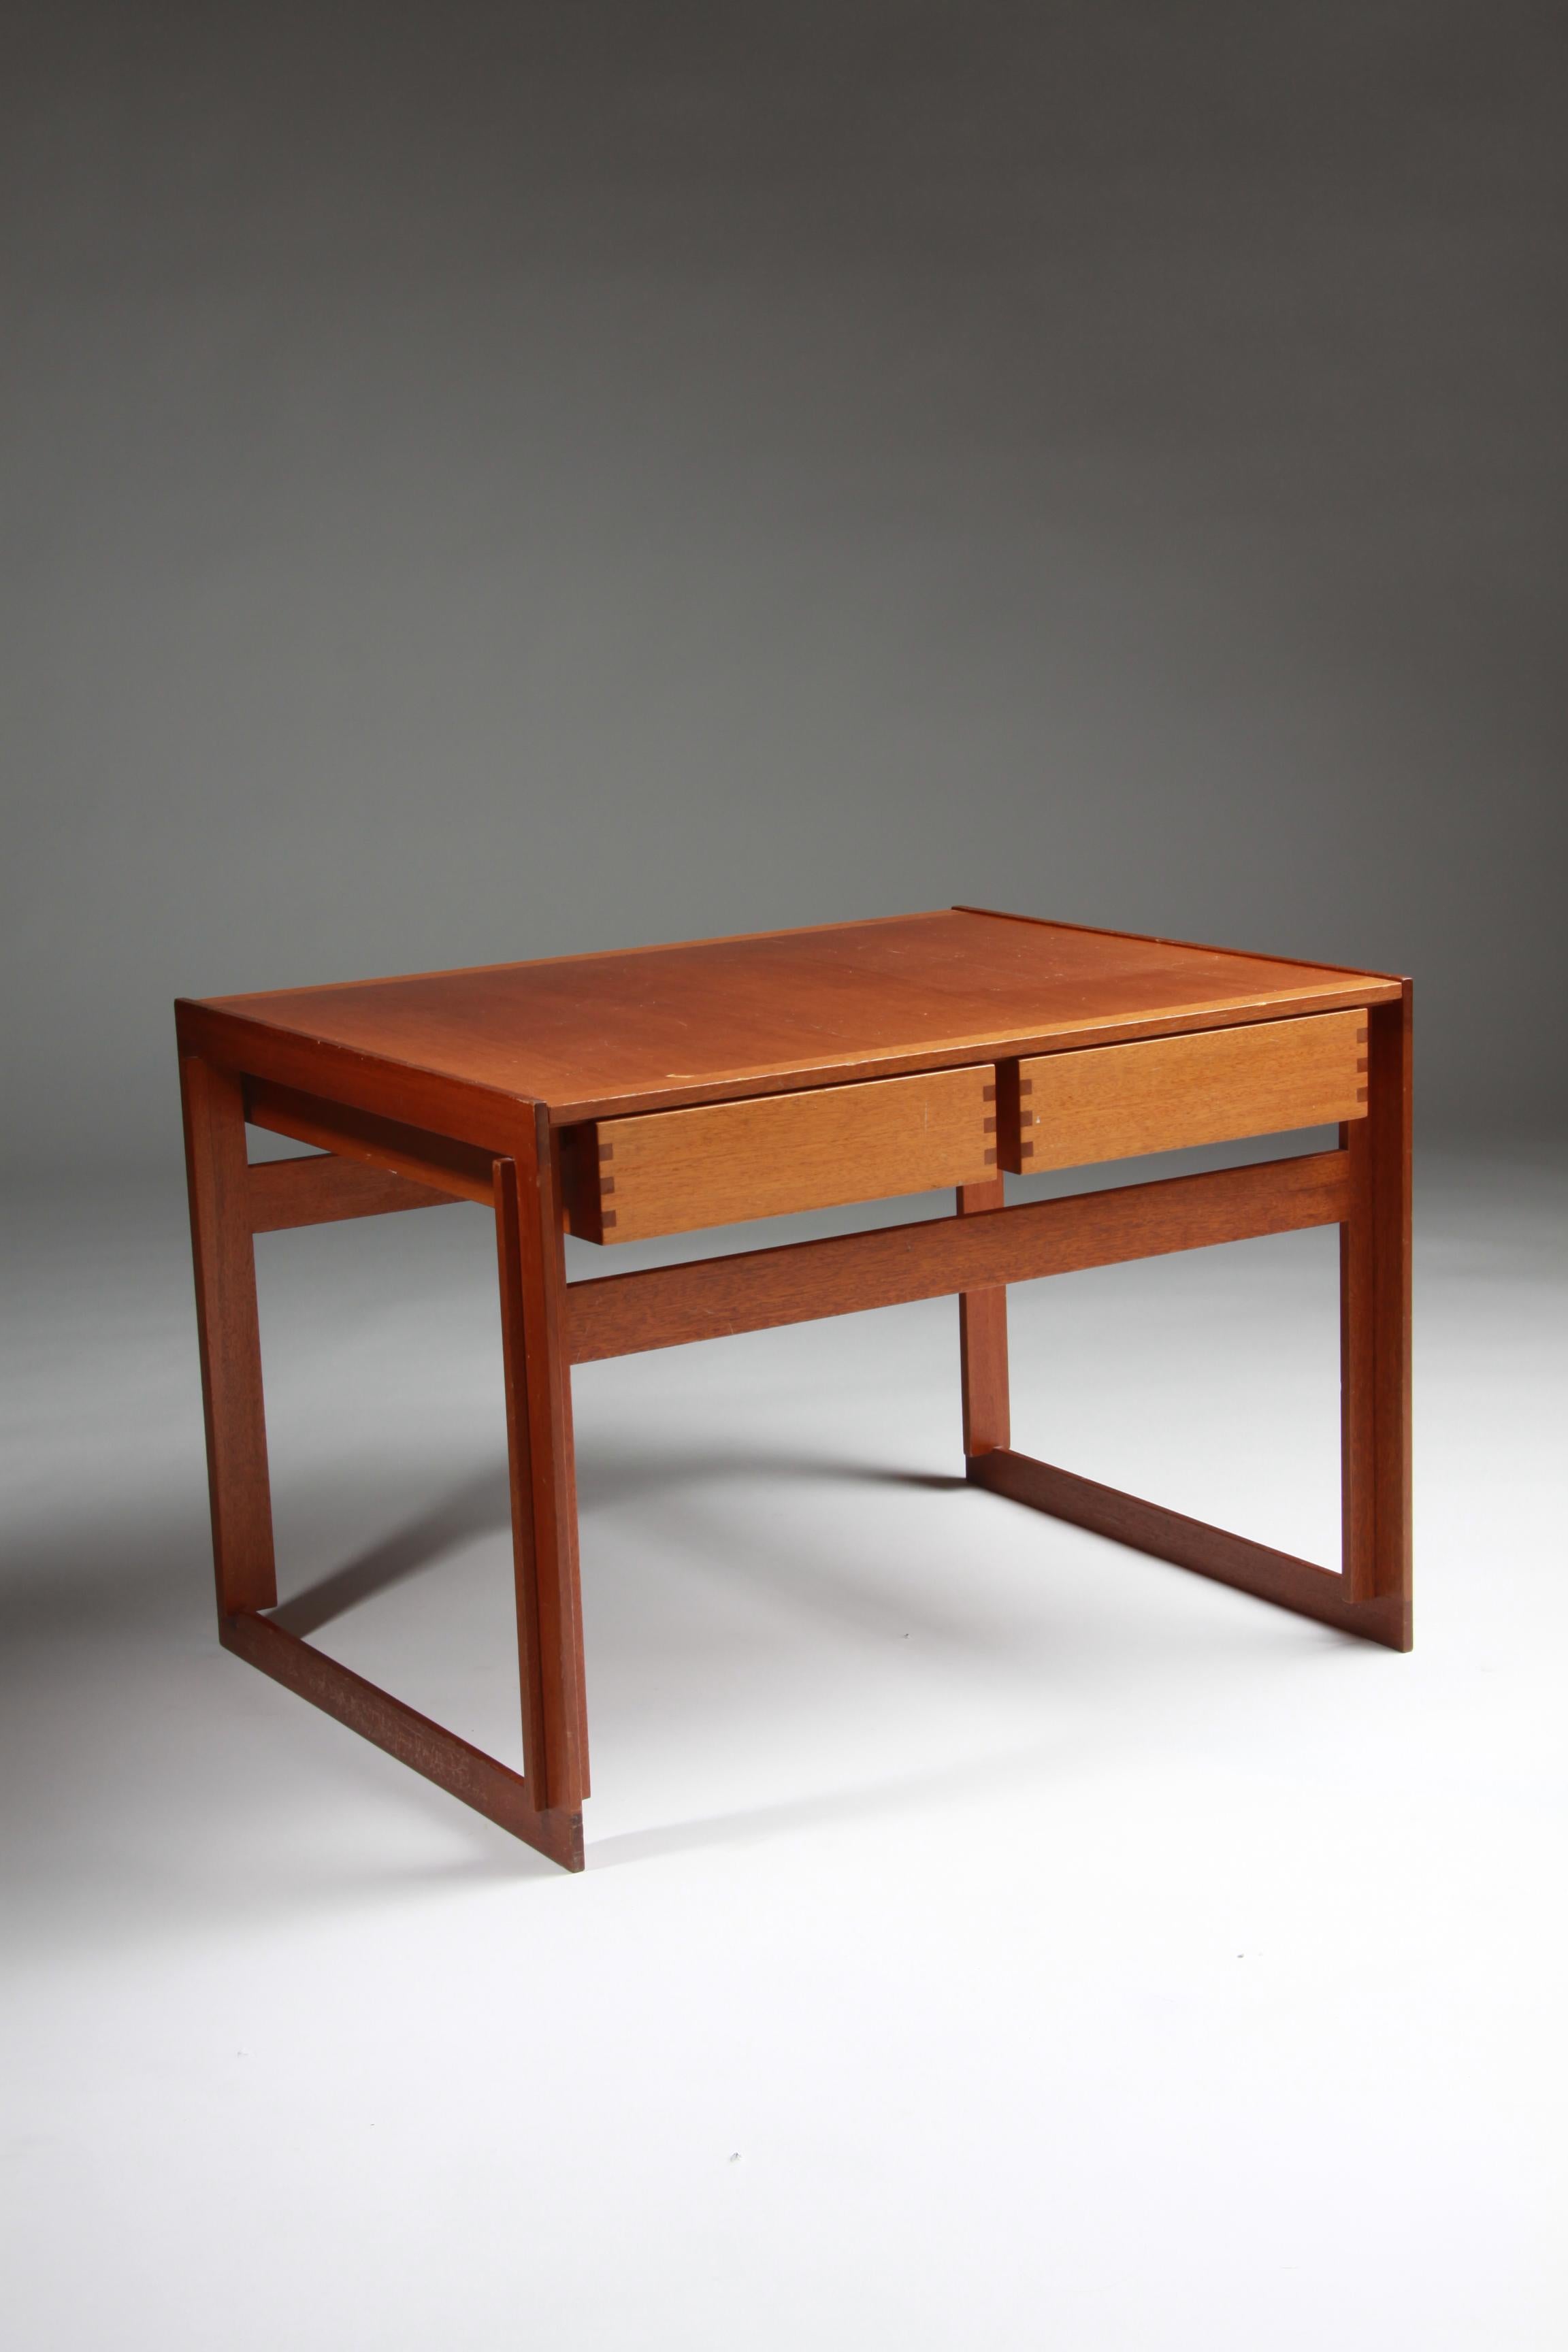 Swedish Table with Drawers, Designed by HI-Gruppen, Sweden, 1960s